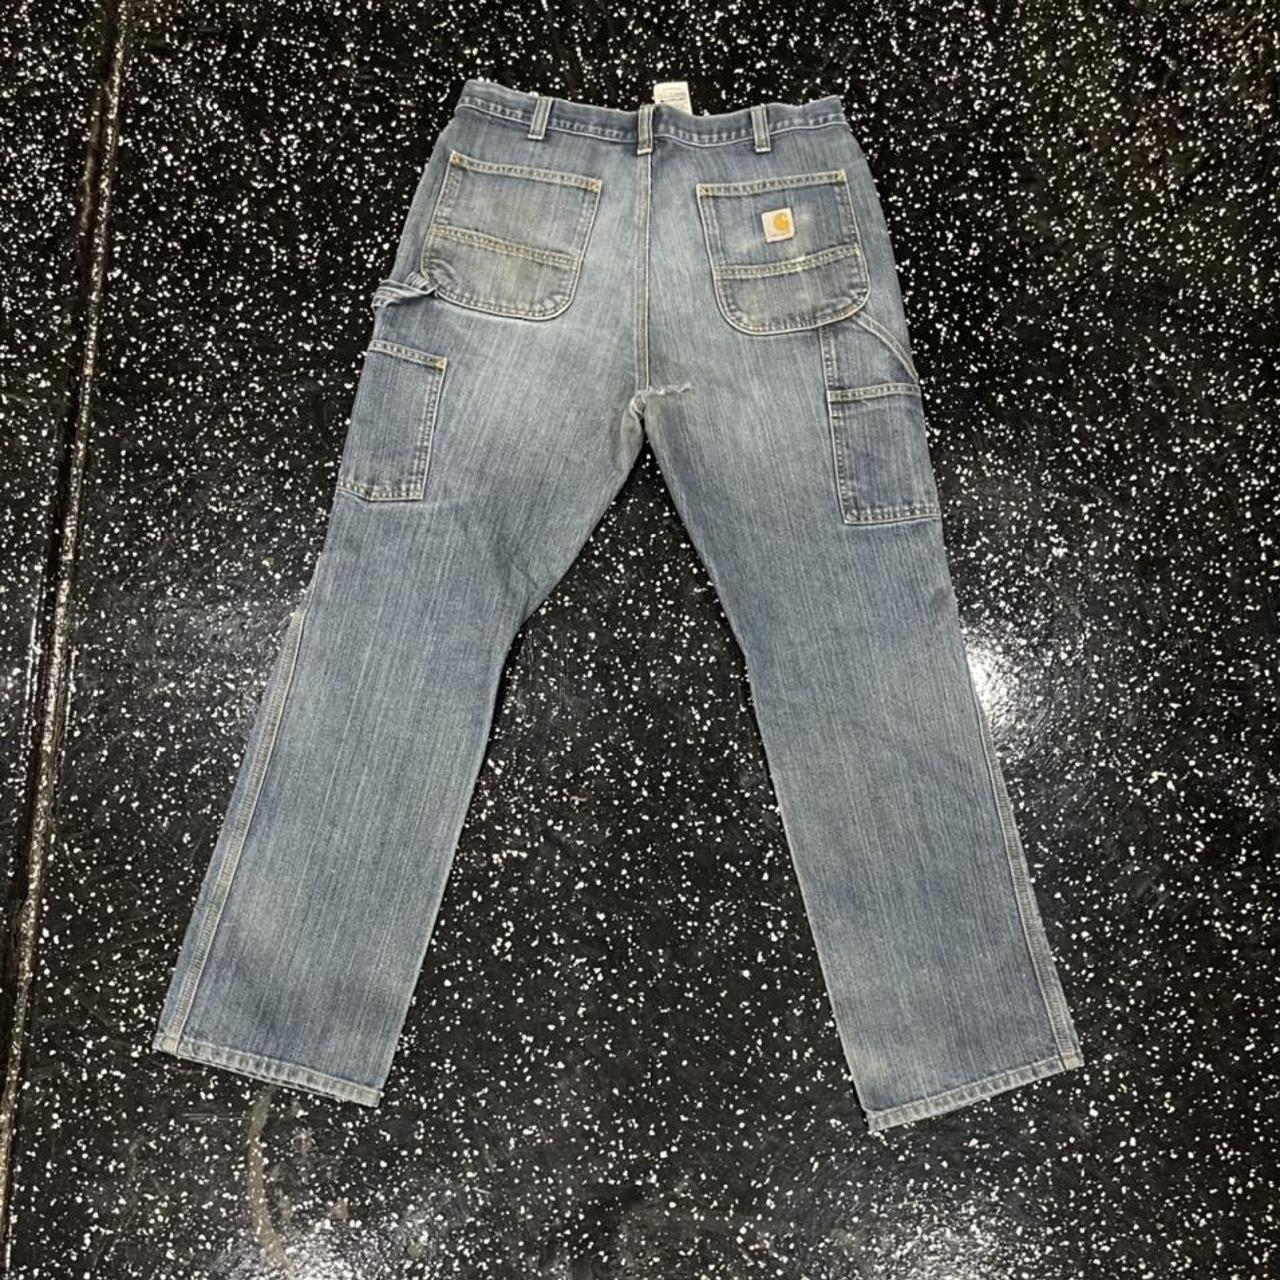 Product Image 2 - Carhartt Carpenter jeans 
Really nice